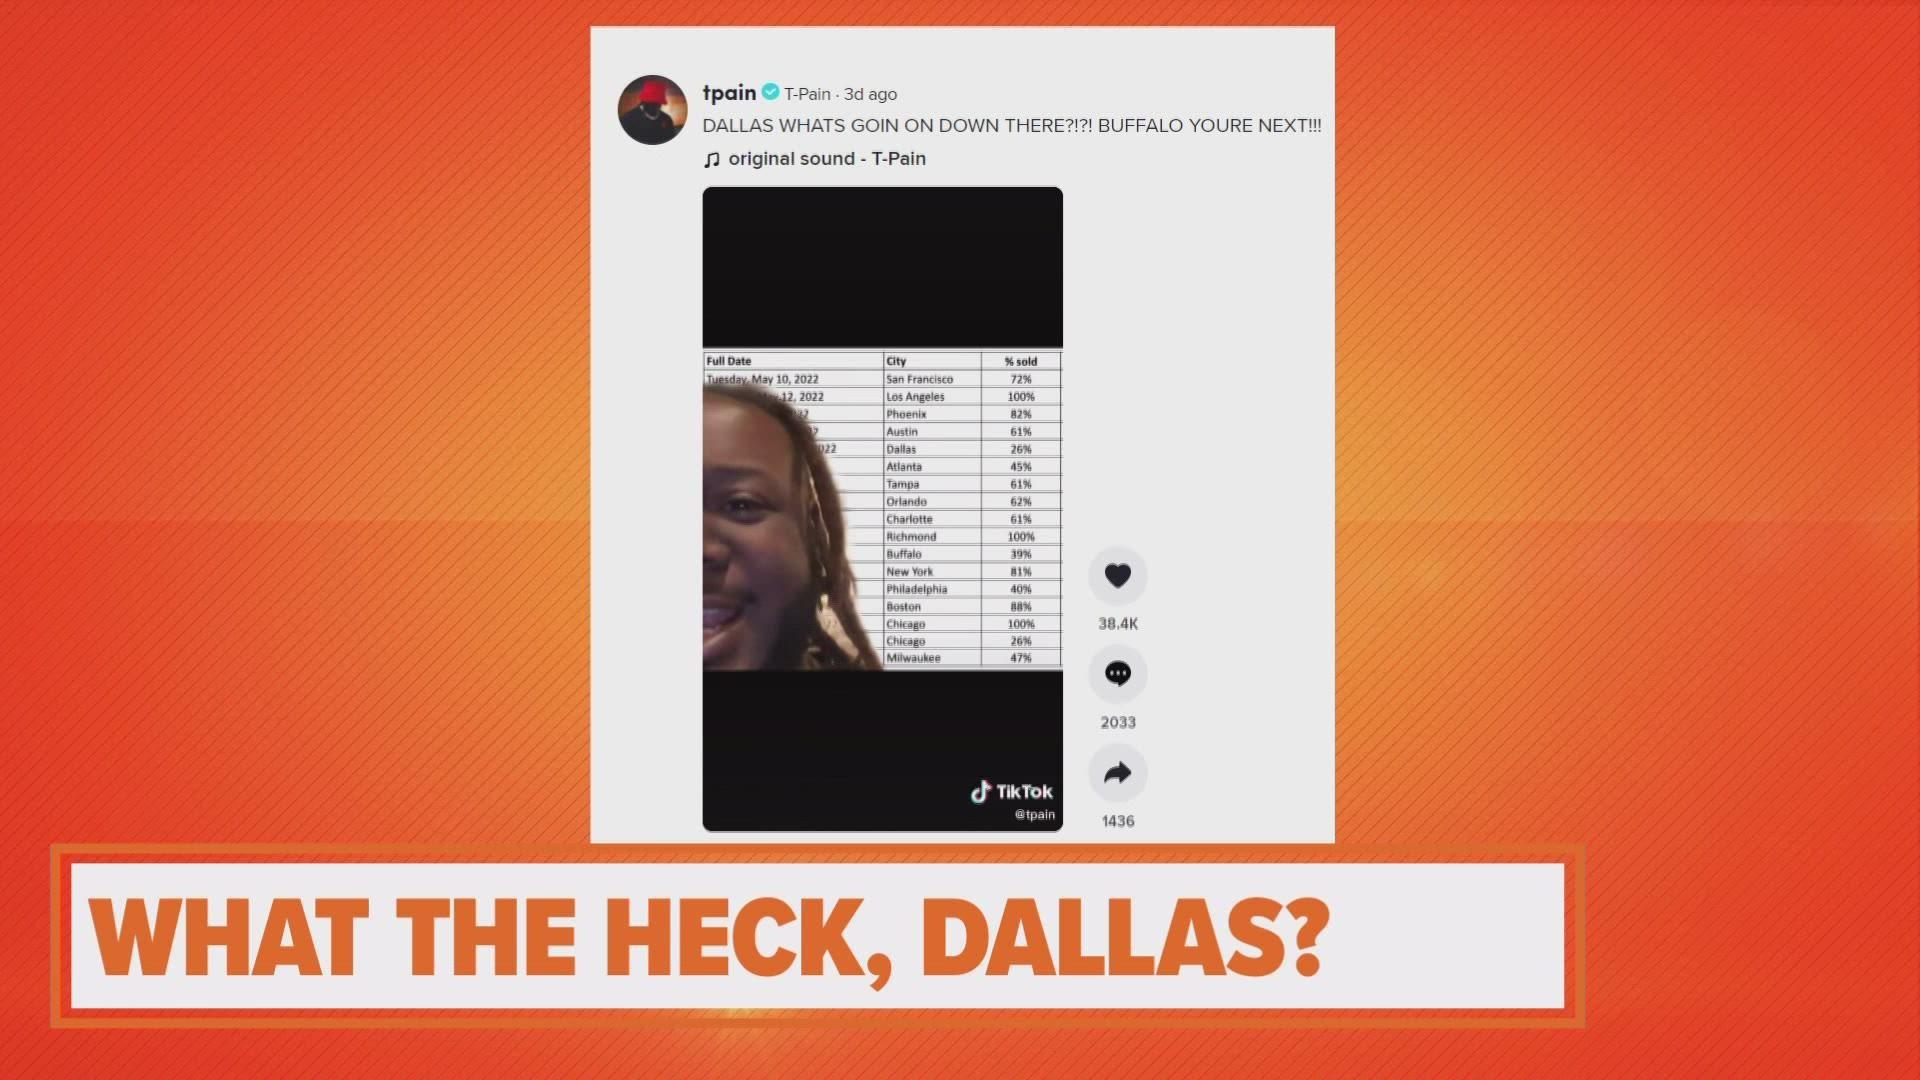 In a Tik Tok video on the rapper's profile, he was upset his Dallas show was reporting 26% of tickets sold at his show at The Factory in Deep Ellum.